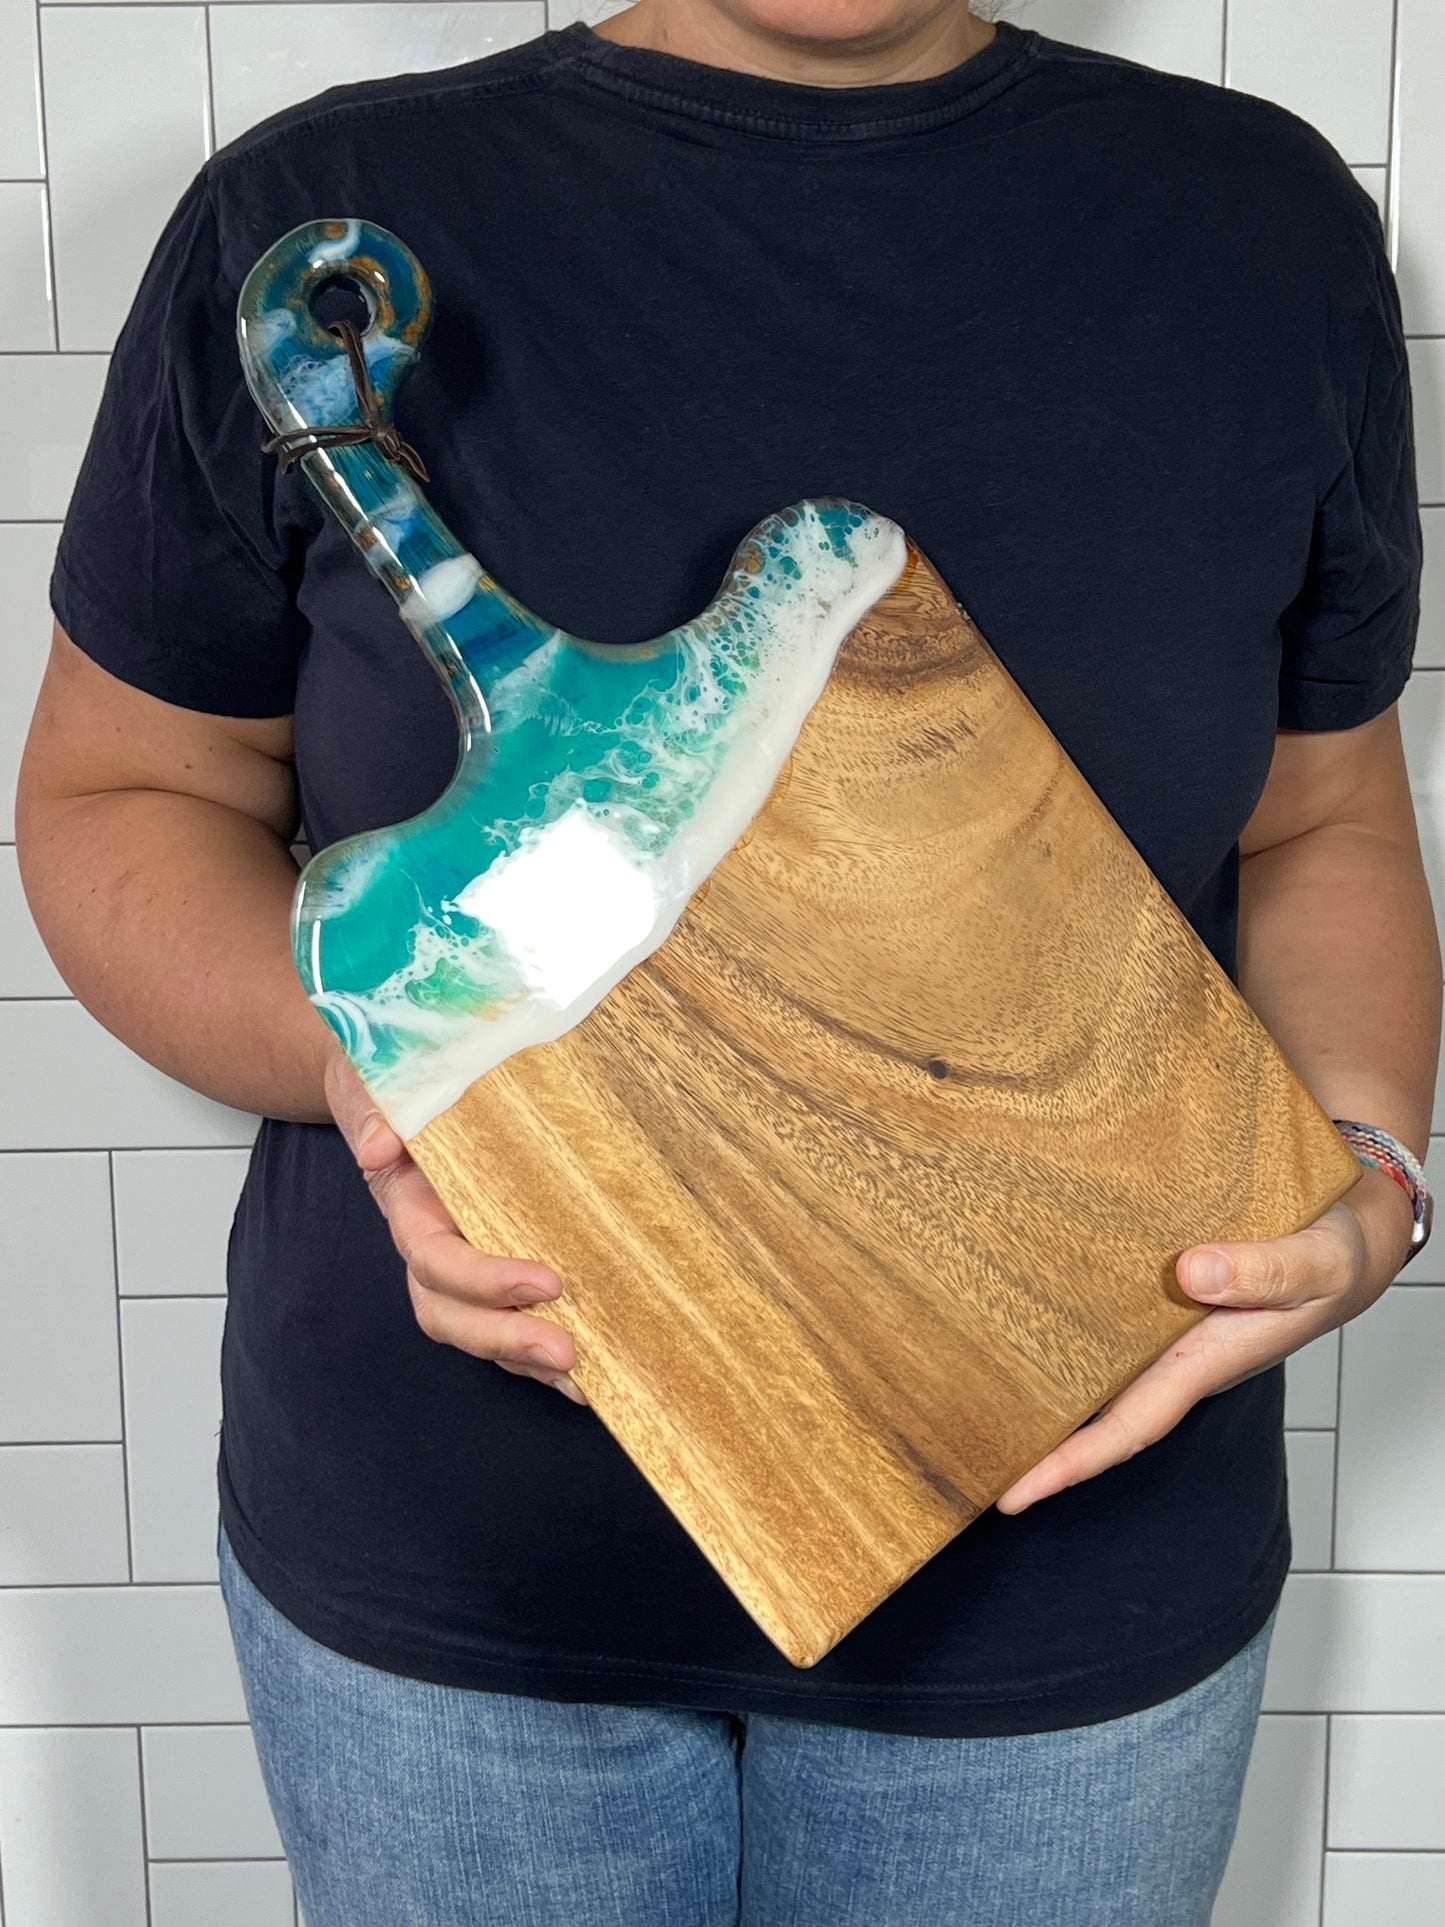 Ocean Inspired Live Edge Charcuterie Cheese Cutting Board: Walnut with Beach Blue & White Epoxy Resin. Gift for mom, foodies, beach lovers